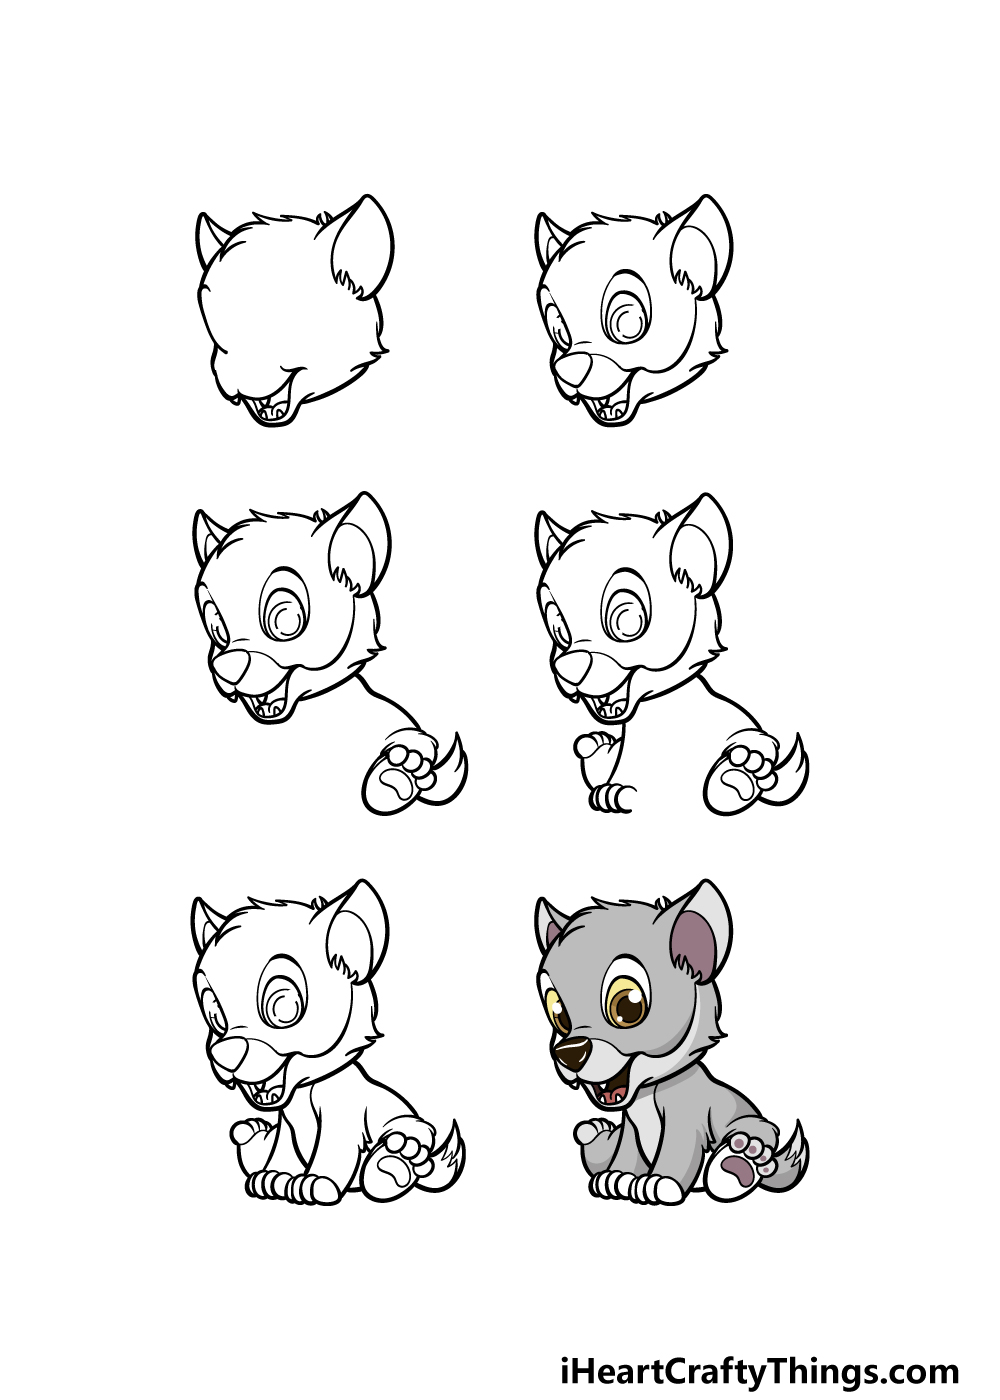 How To Draw A Cartoon Wolf - A Step by Step Guide